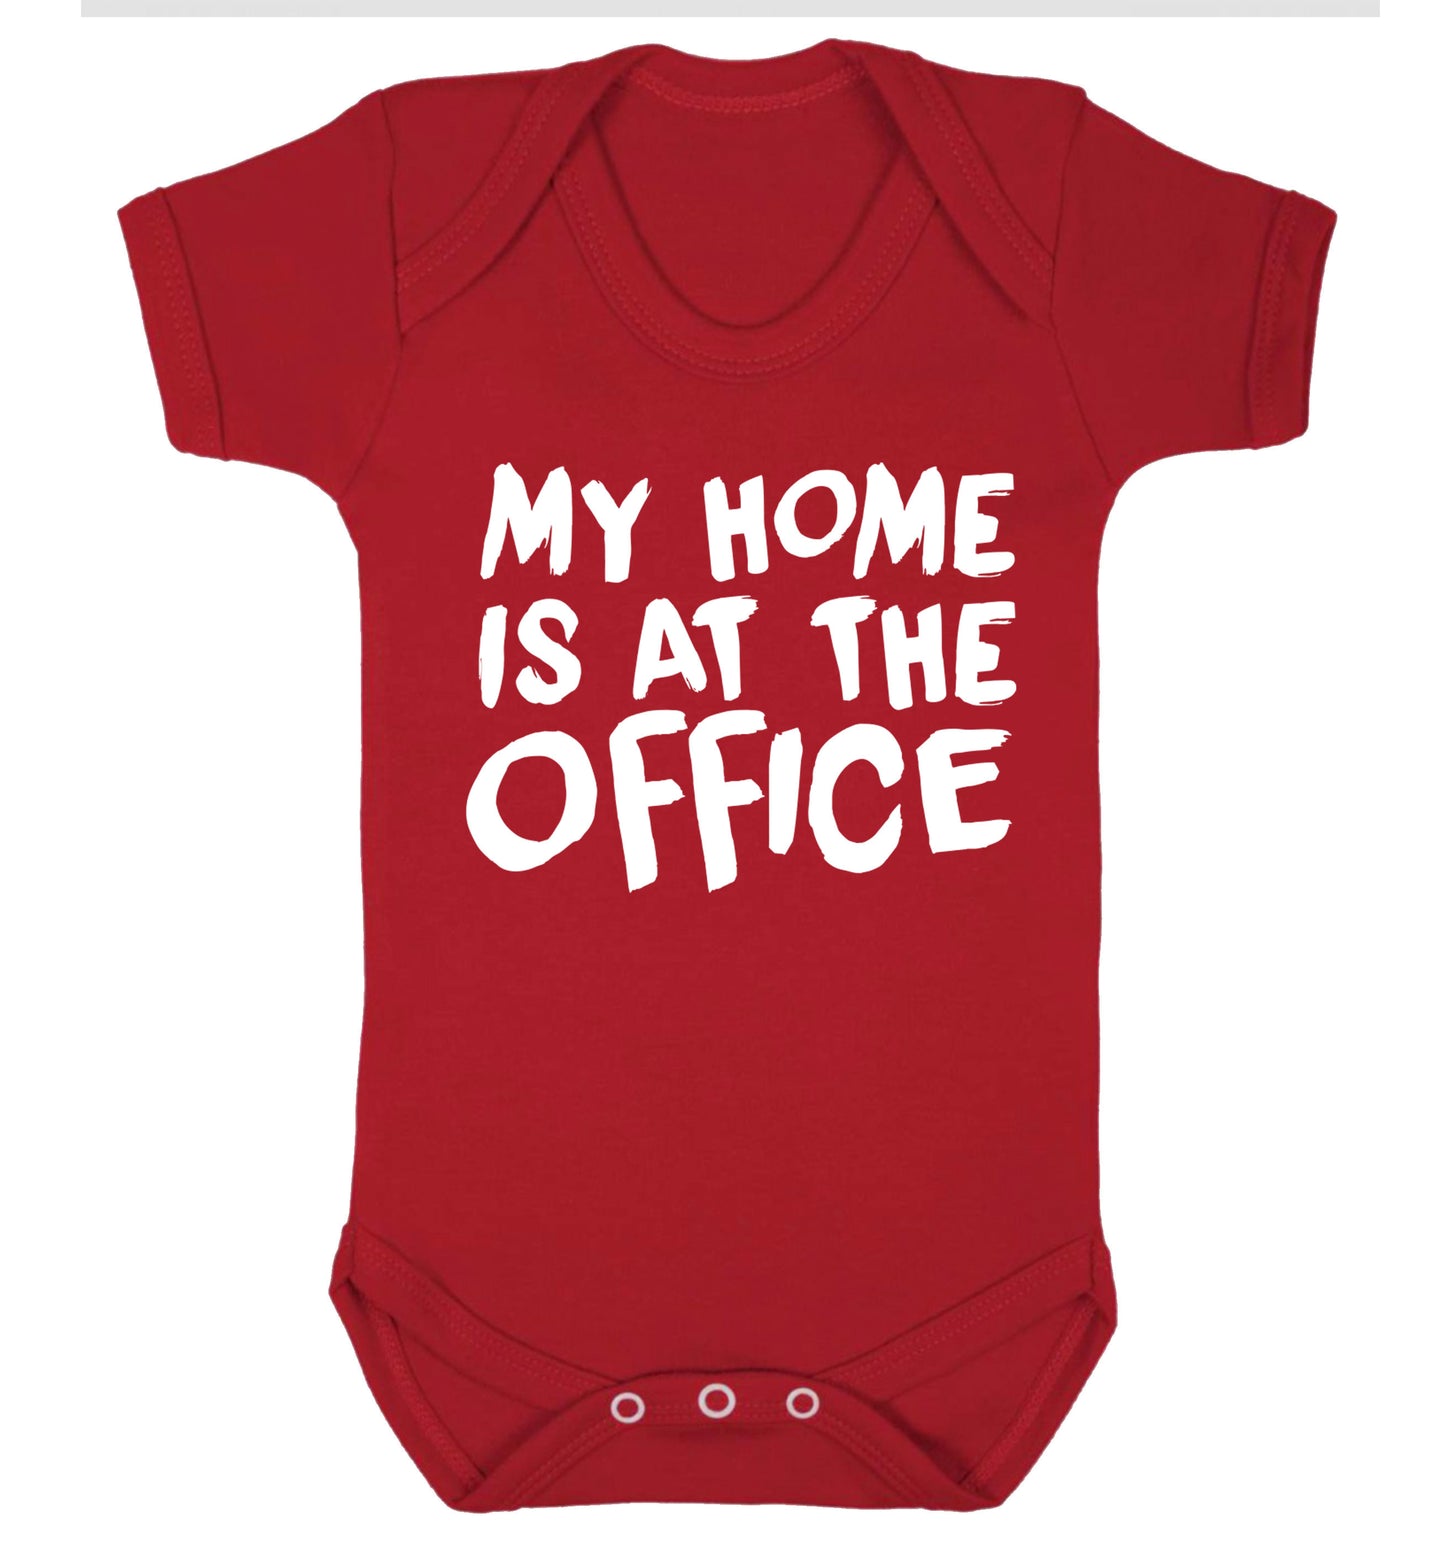 My home is at the office Baby Vest red 18-24 months